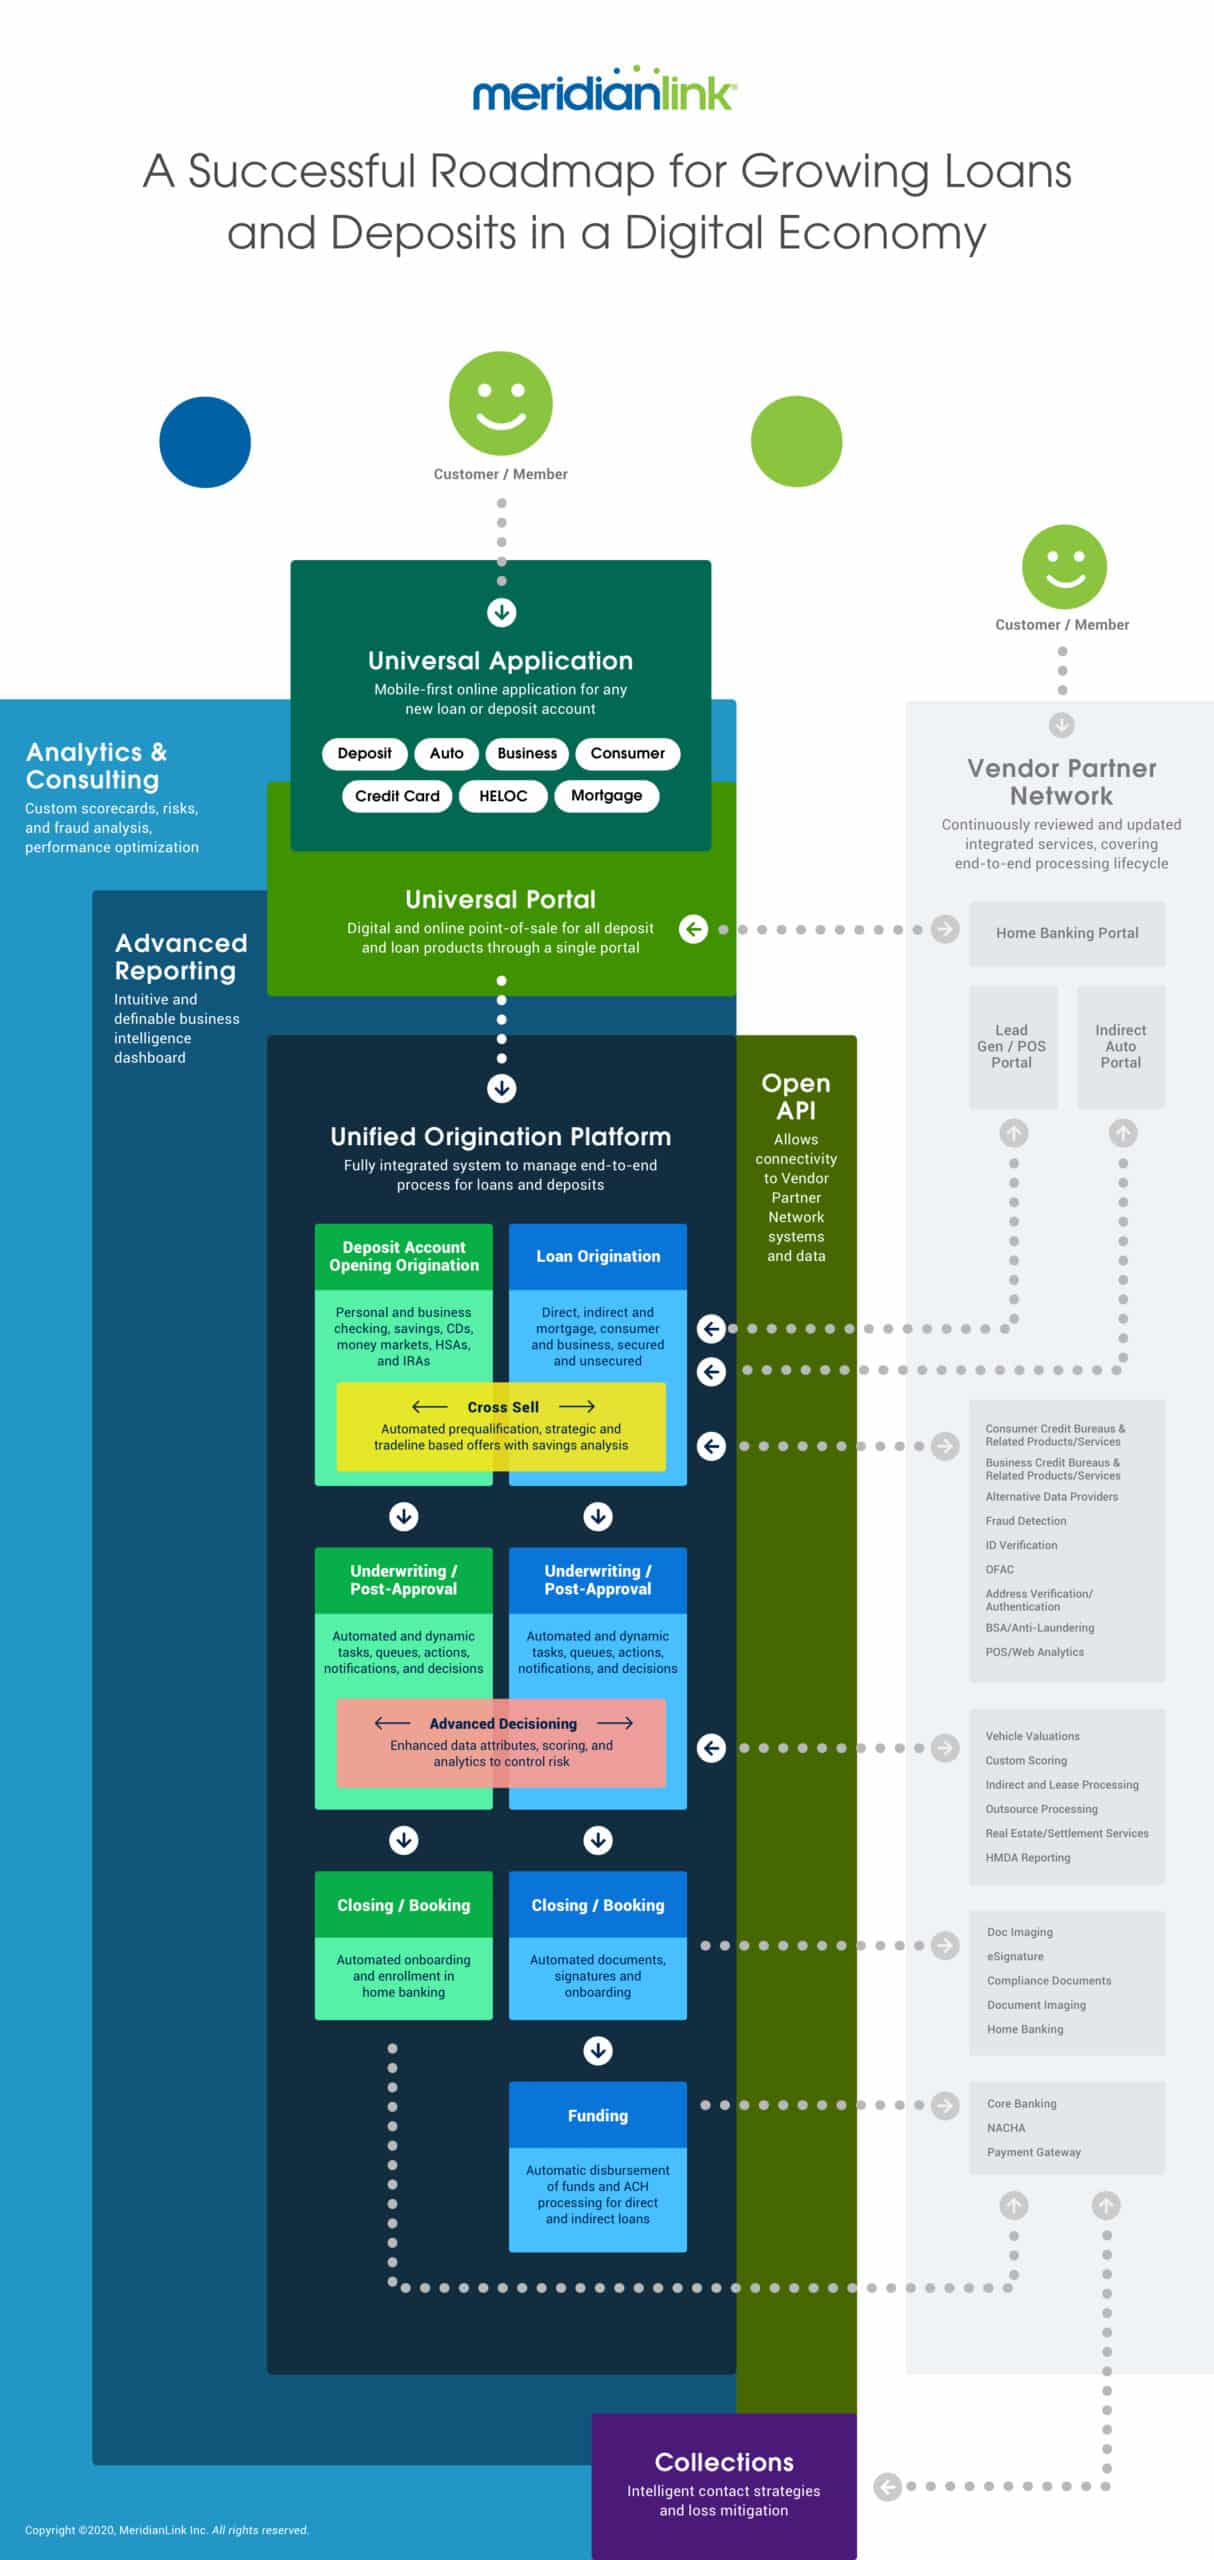 Mapping Out Your Digital Account Opening and Digital Lending Journey Infographic